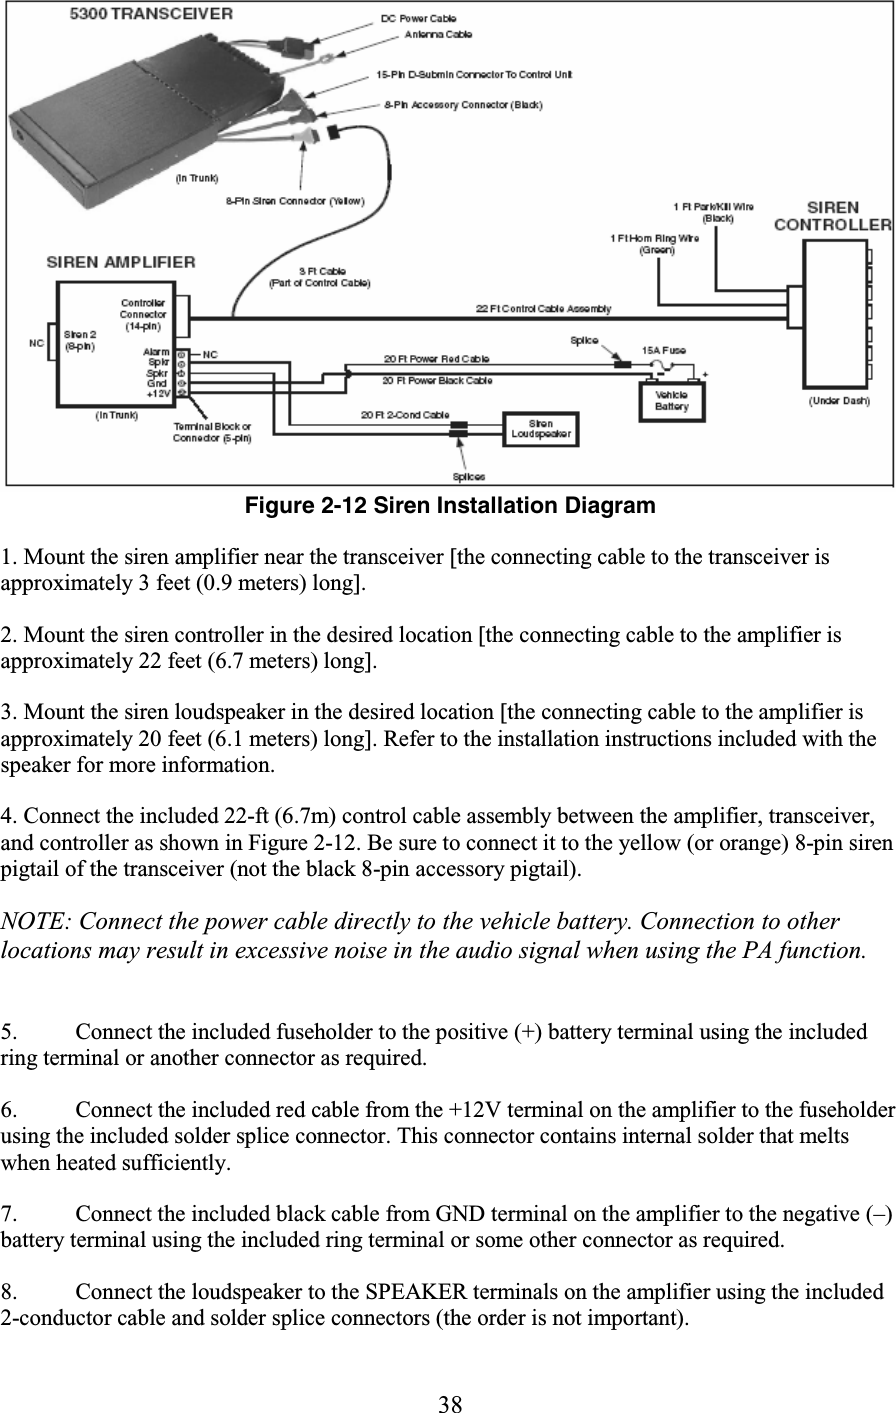 38  Figure 2-12 Siren Installation Diagram 1. Mount the siren amplifier near the transceiver [the connecting cable to the transceiver is approximately 3 feet (0.9 meters) long]. 2. Mount the siren controller in the desired location [the connecting cable to the amplifier is approximately 22 feet (6.7 meters) long]. 3. Mount the siren loudspeaker in the desired location [the connecting cable to the amplifier is approximately 20 feet (6.1 meters) long]. Refer to the installation instructions included with the speaker for more information. 4. Connect the included 22-ft (6.7m) control cable assembly between the amplifier, transceiver, and controller as shown in Figure 2-12. Be sure to connect it to the yellow (or orange) 8-pin siren pigtail of the transceiver (not the black 8-pin accessory pigtail). NOTE: Connect the power cable directly to the vehicle battery. Connection to other locations may result in excessive noise in the audio signal when using the PA function.  5. Connect the included fuseholder to the positive (+) battery terminal using the included ring terminal or another connector as required.  6. Connect the included red cable from the +12V terminal on the amplifier to the fuseholder using the included solder splice connector. This connector contains internal solder that melts when heated sufficiently.  7. Connect the included black cable from GND terminal on the amplifier to the negative (–) battery terminal using the included ring terminal or some other connector as required.  8. Connect the loudspeaker to the SPEAKER terminals on the amplifier using the included 2-conductor cable and solder splice connectors (the order is not important).  